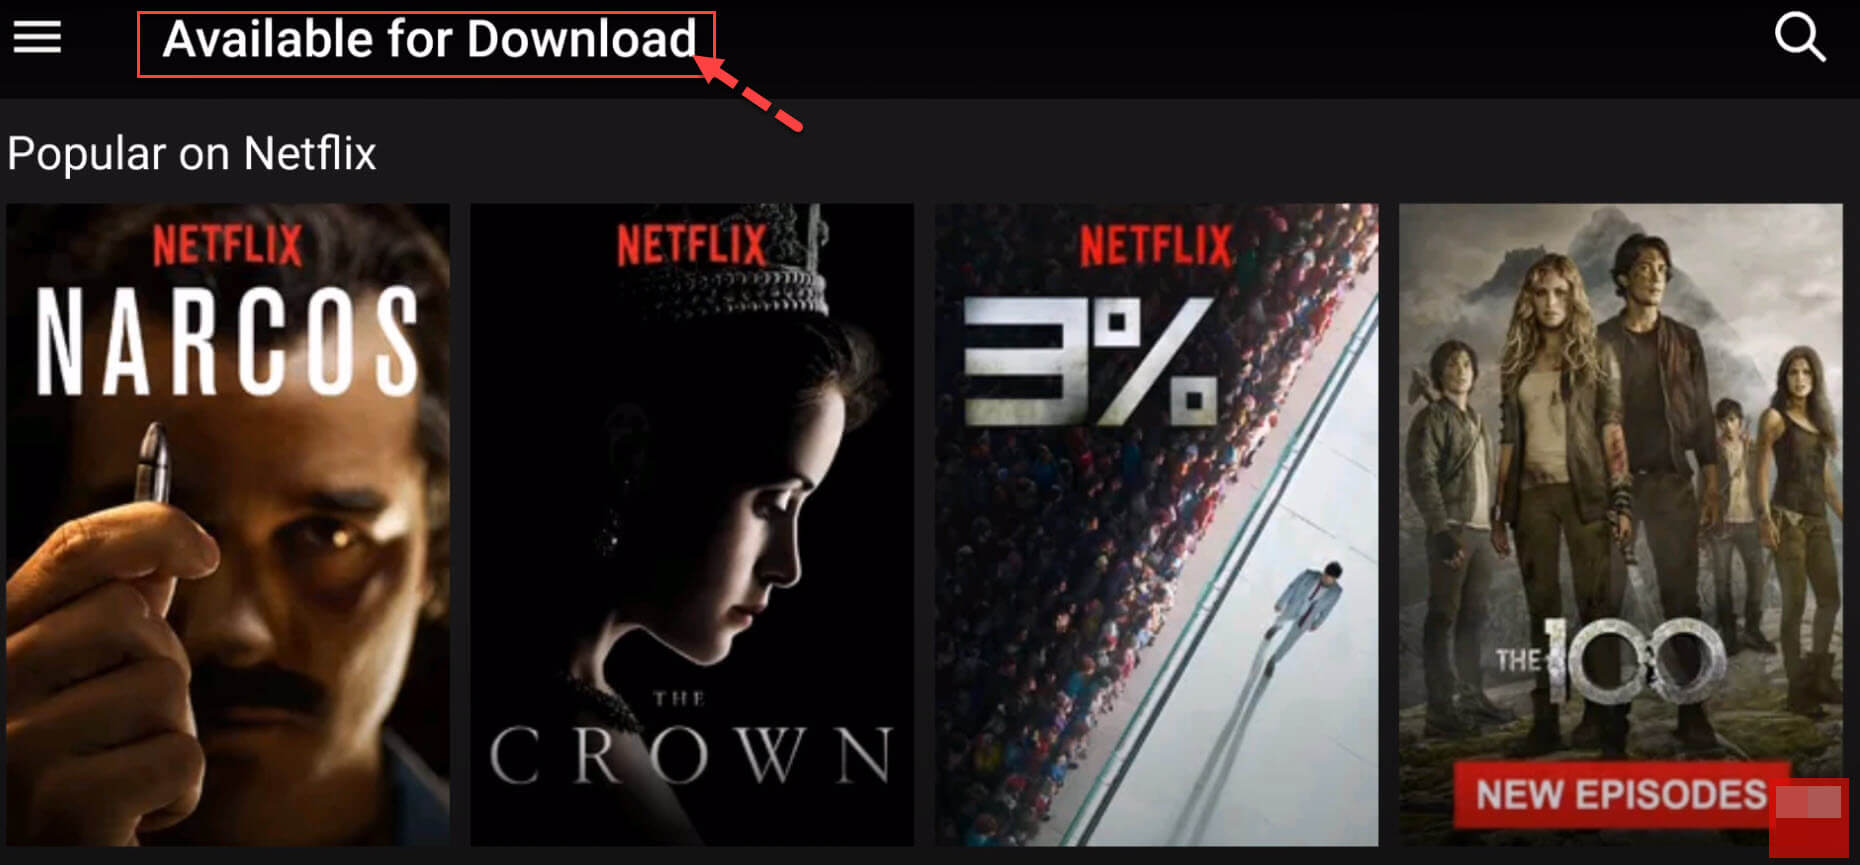 view all available downloading Netflix videos